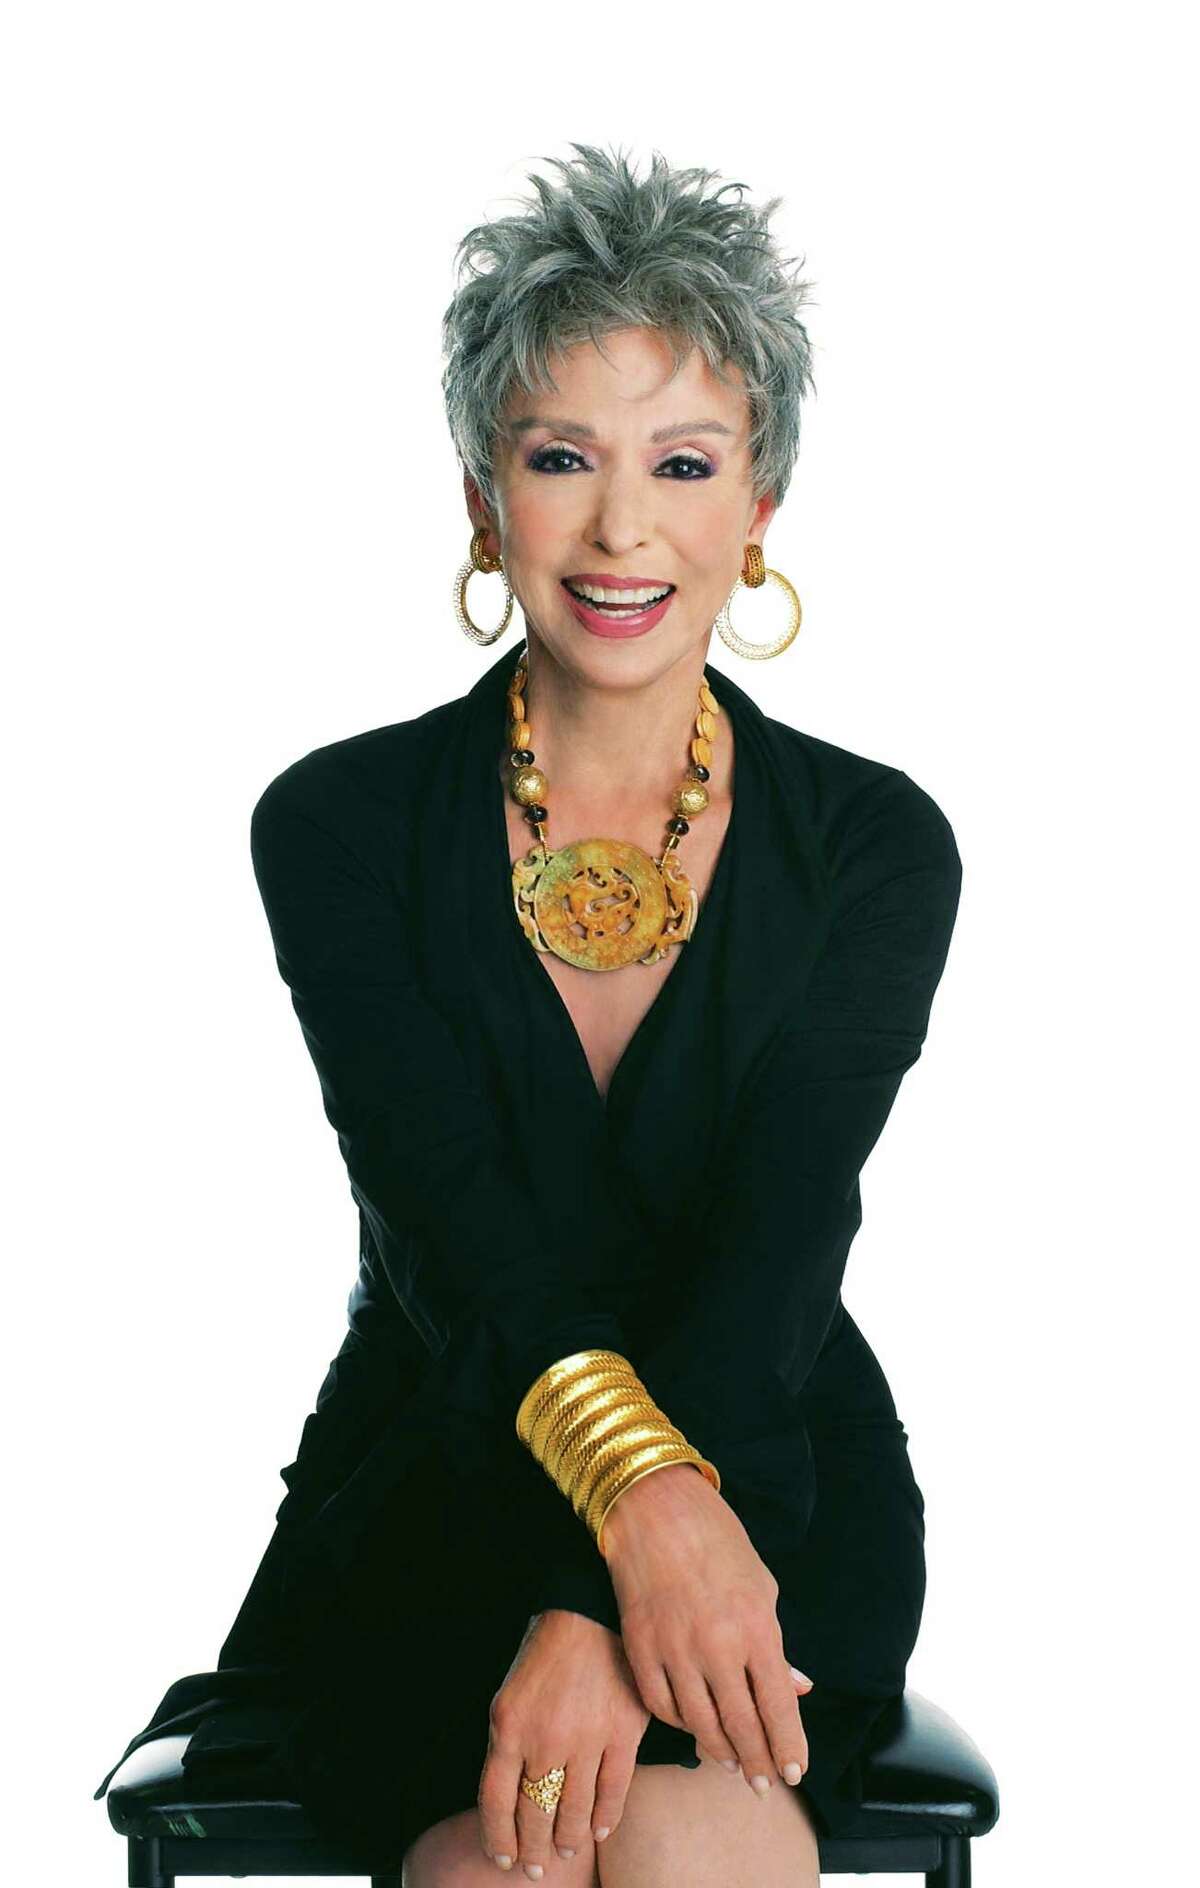 Rita Moreno will be featured at an event called "Dinner with Rita" at 6 p.m. Sept. 22 at the Marriott Rivercenter, 101 Bowie St.